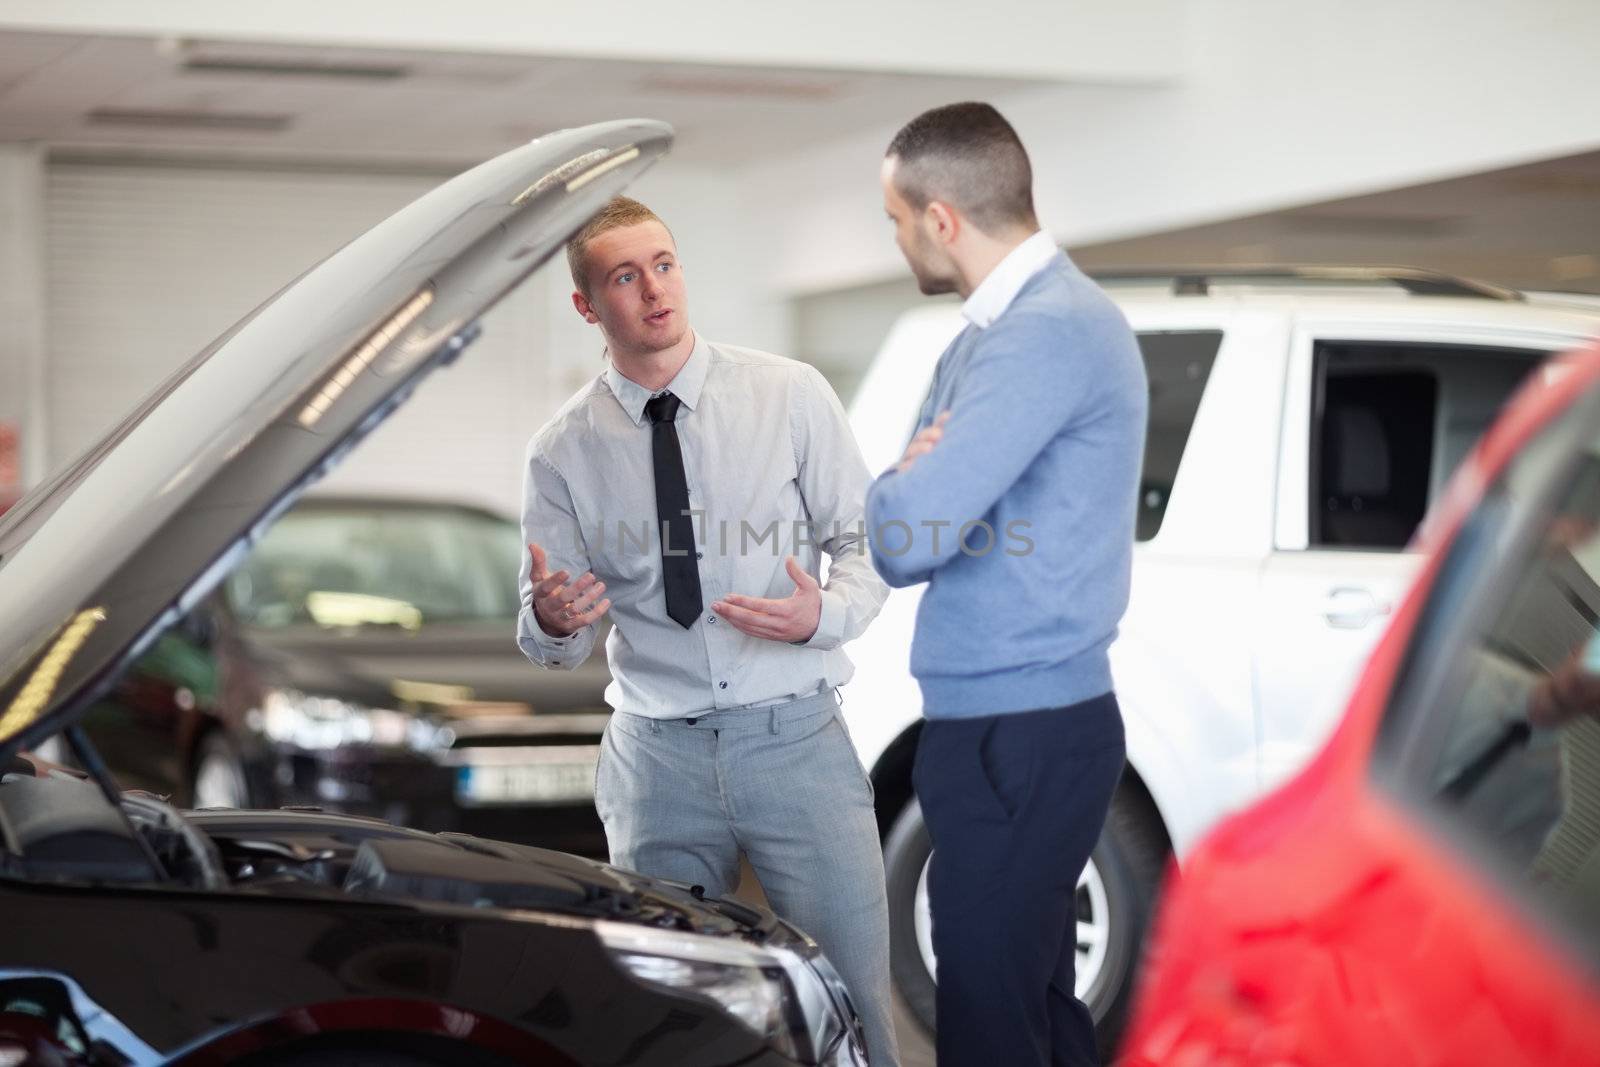 Two men chatting in front of an open engine in a car dealership